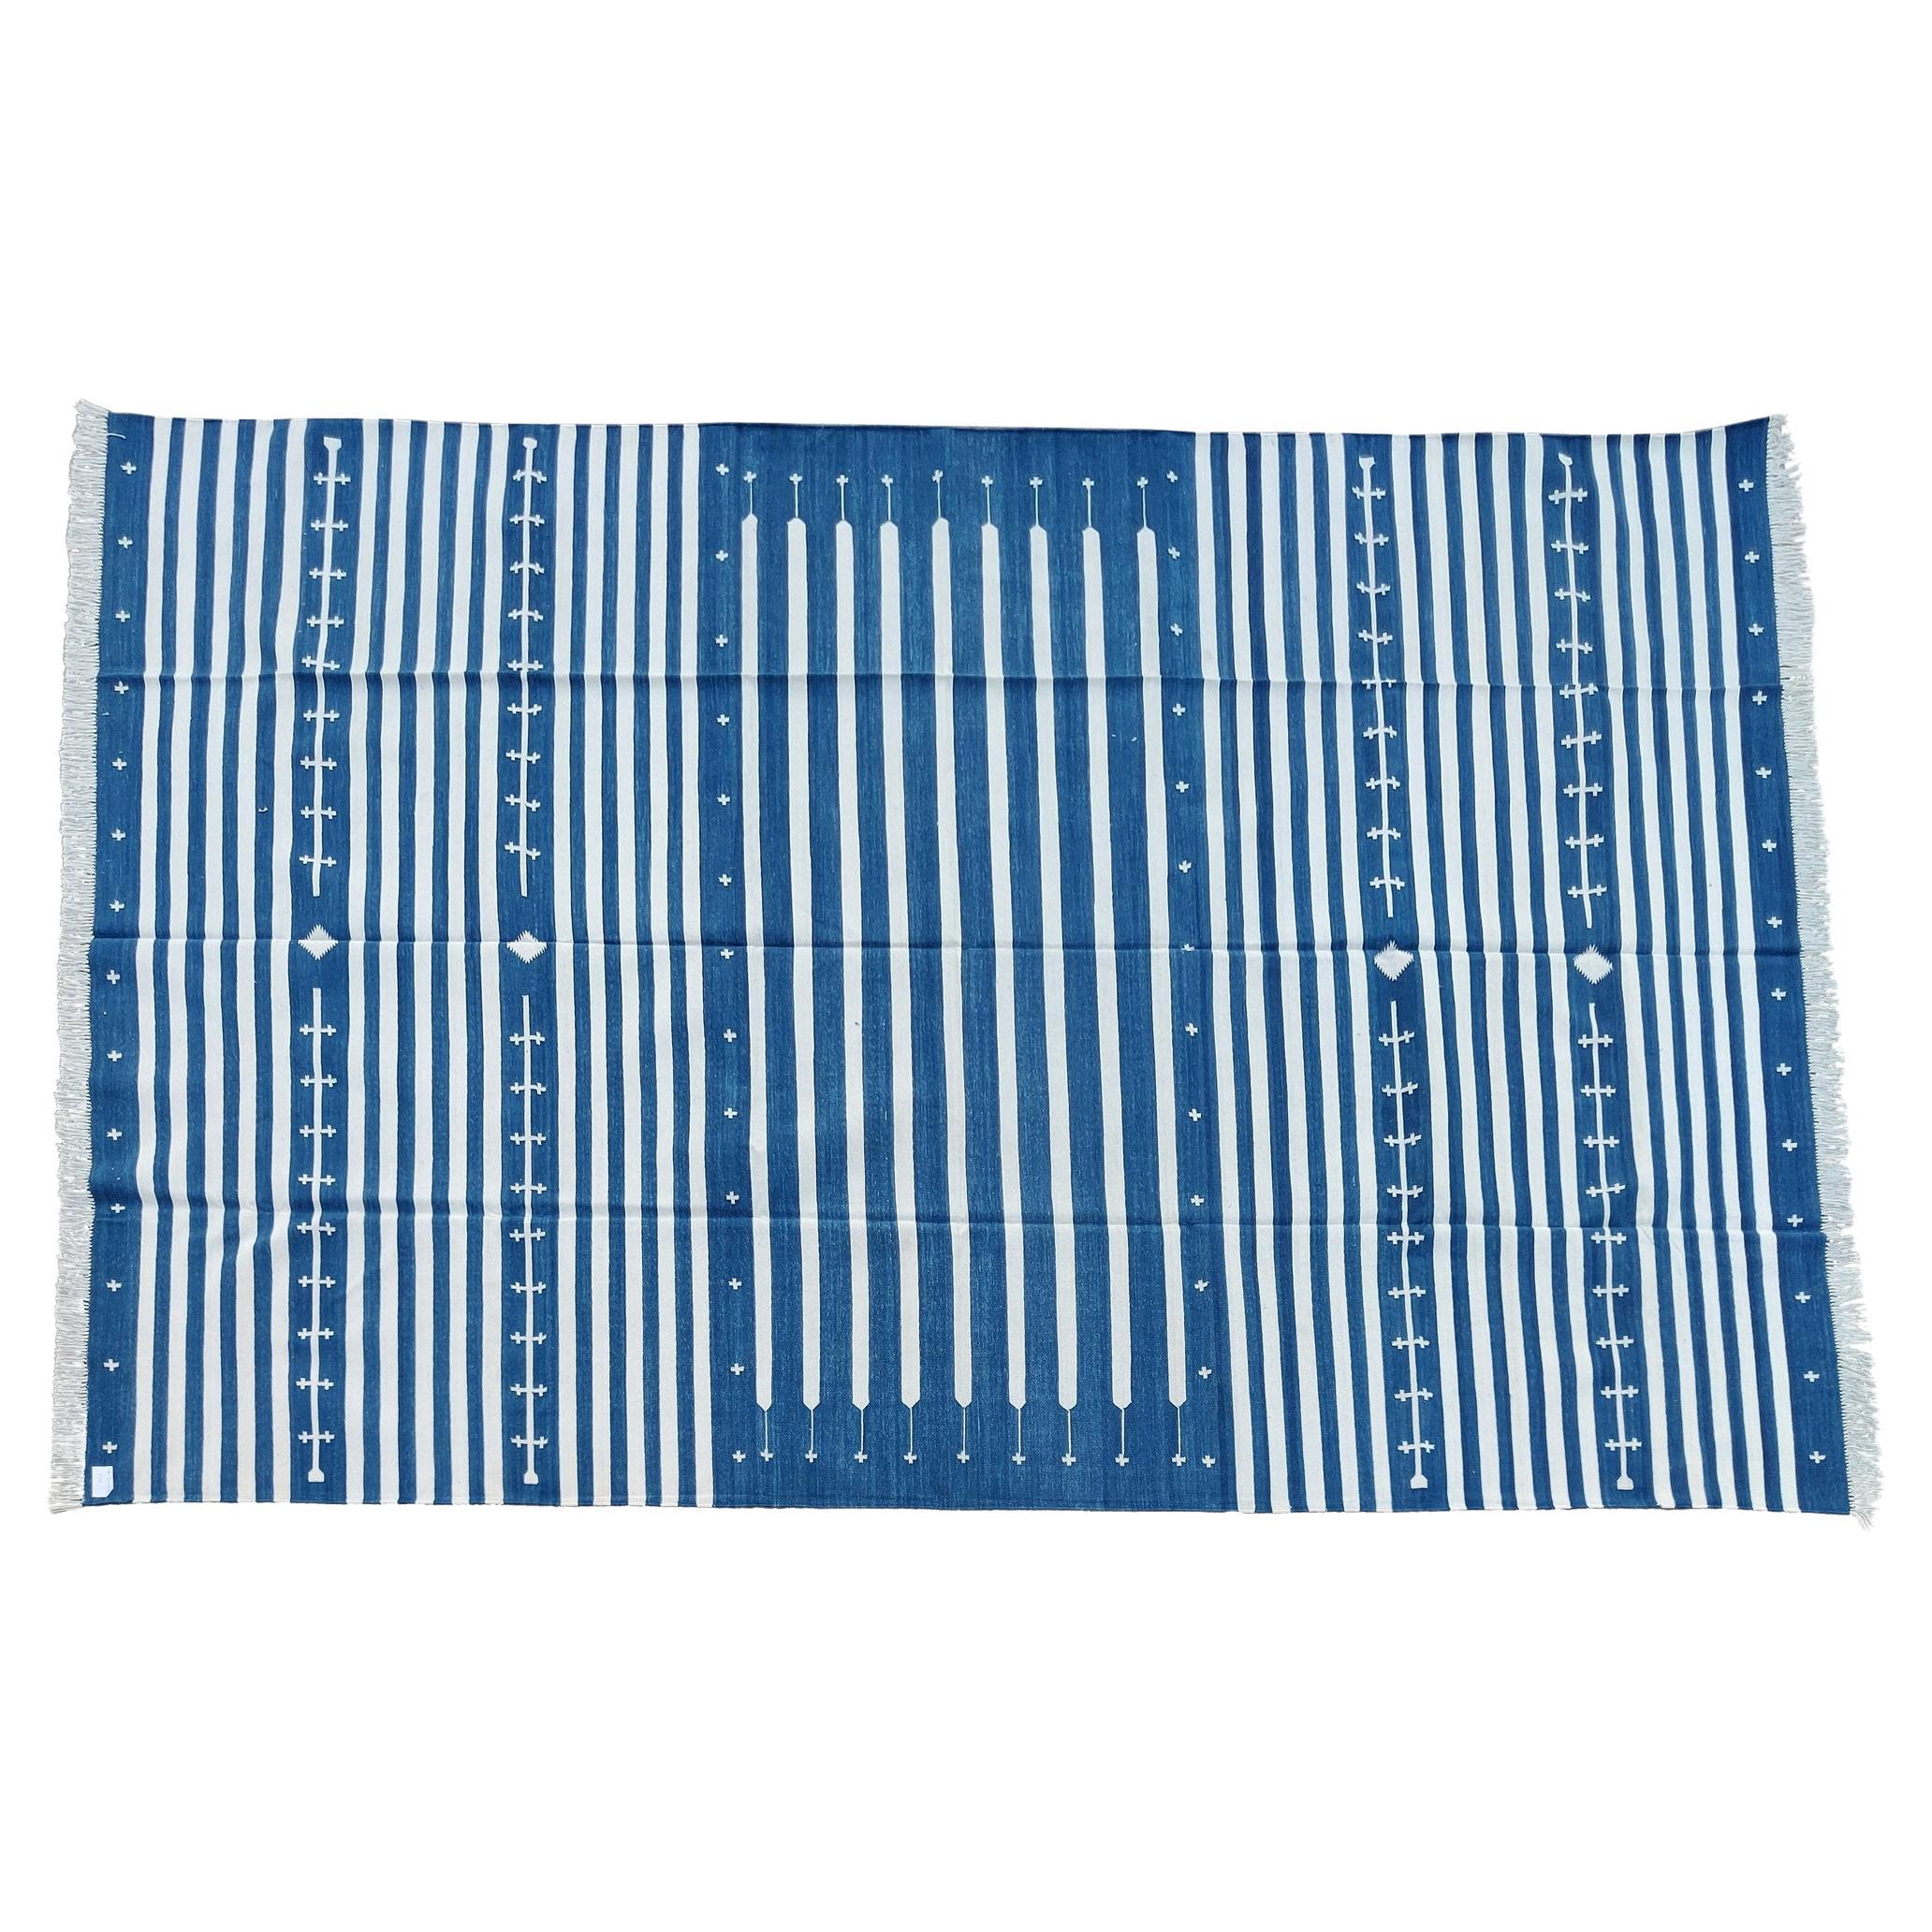 Handmade Cotton Area Flat Weave Rug, 8x10 Blue And White Striped Indian Dhurrie For Sale